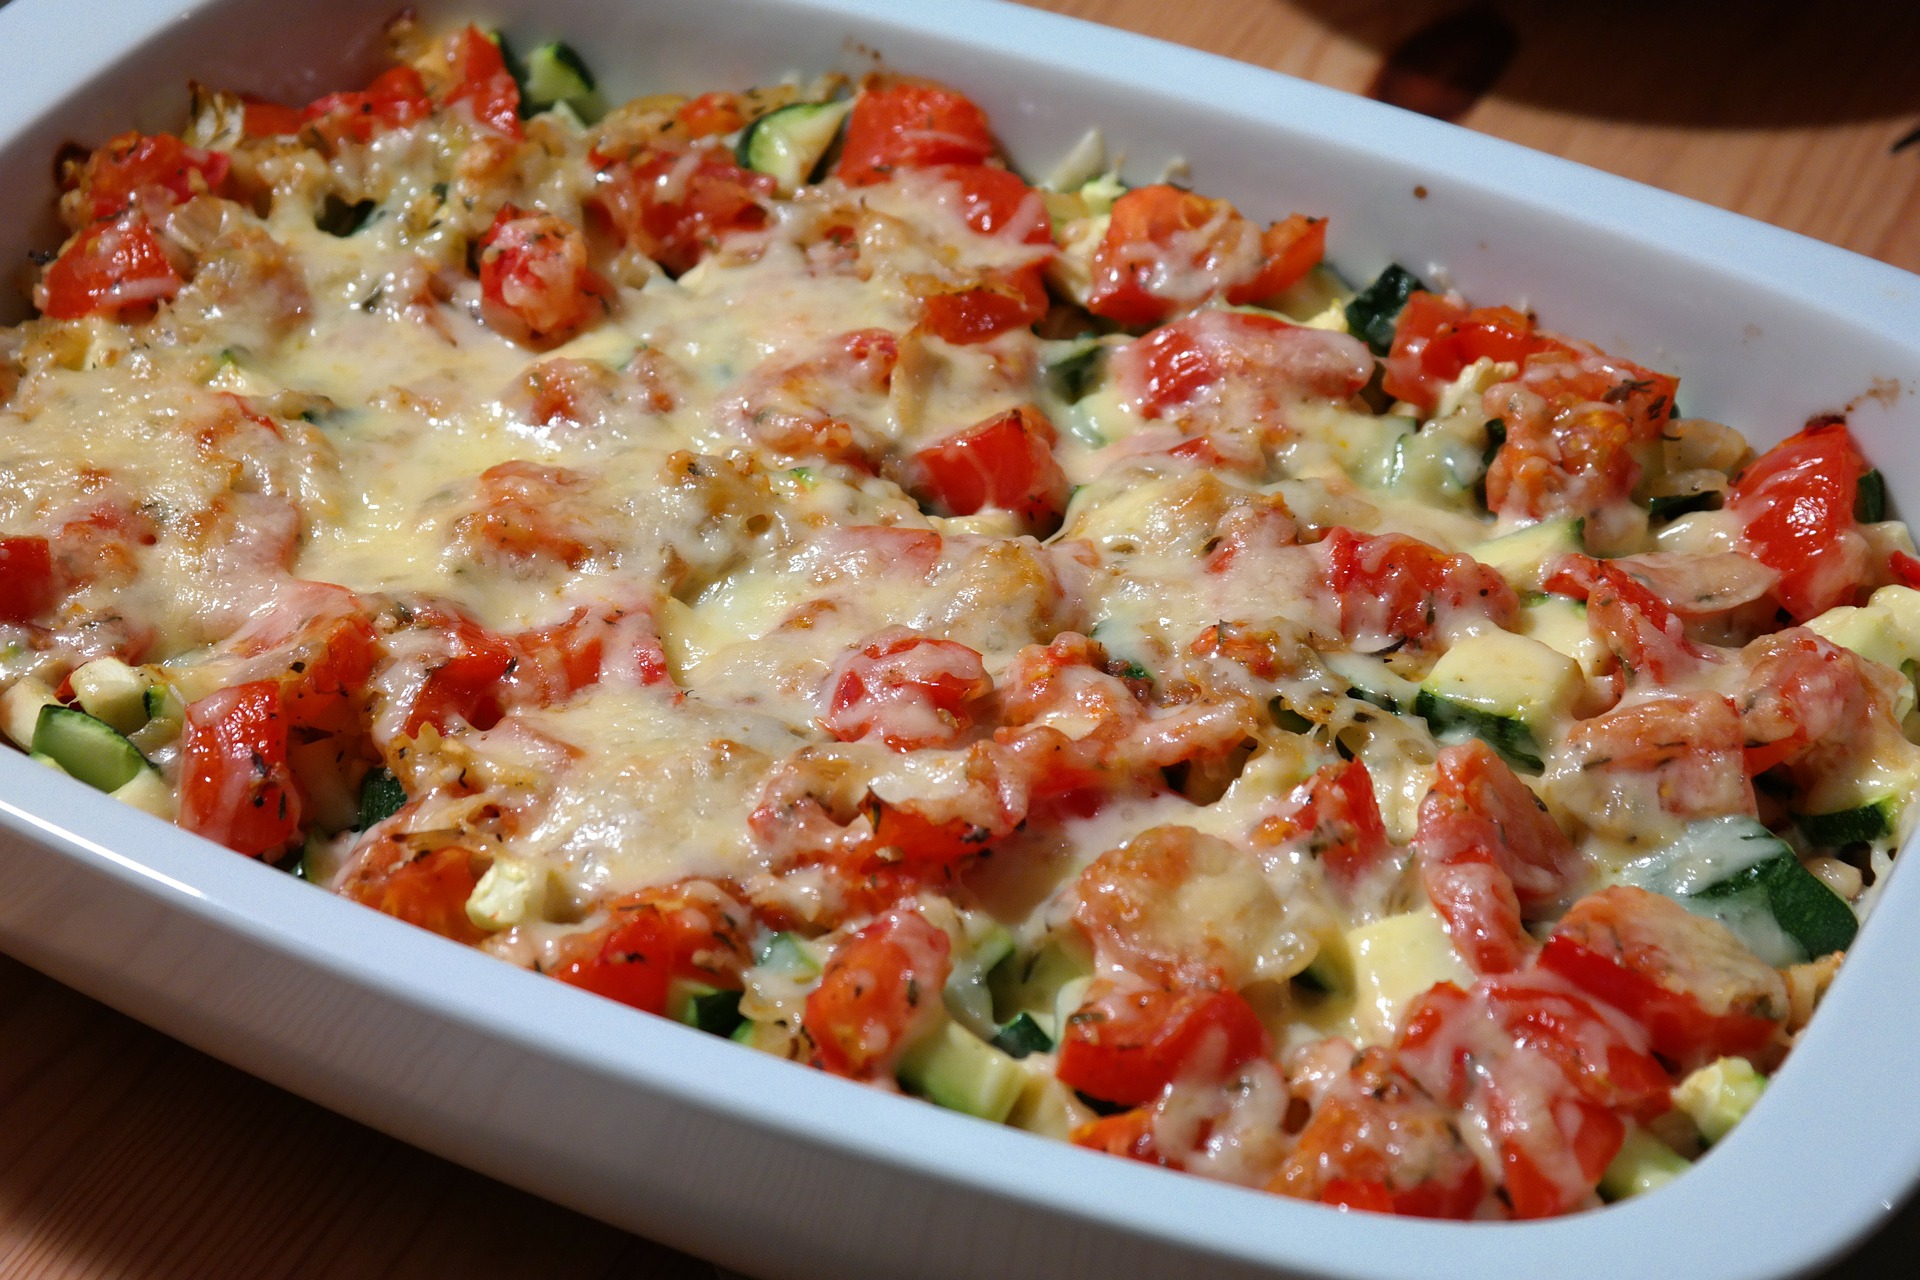 Vegetables sprinkled with melted cheese